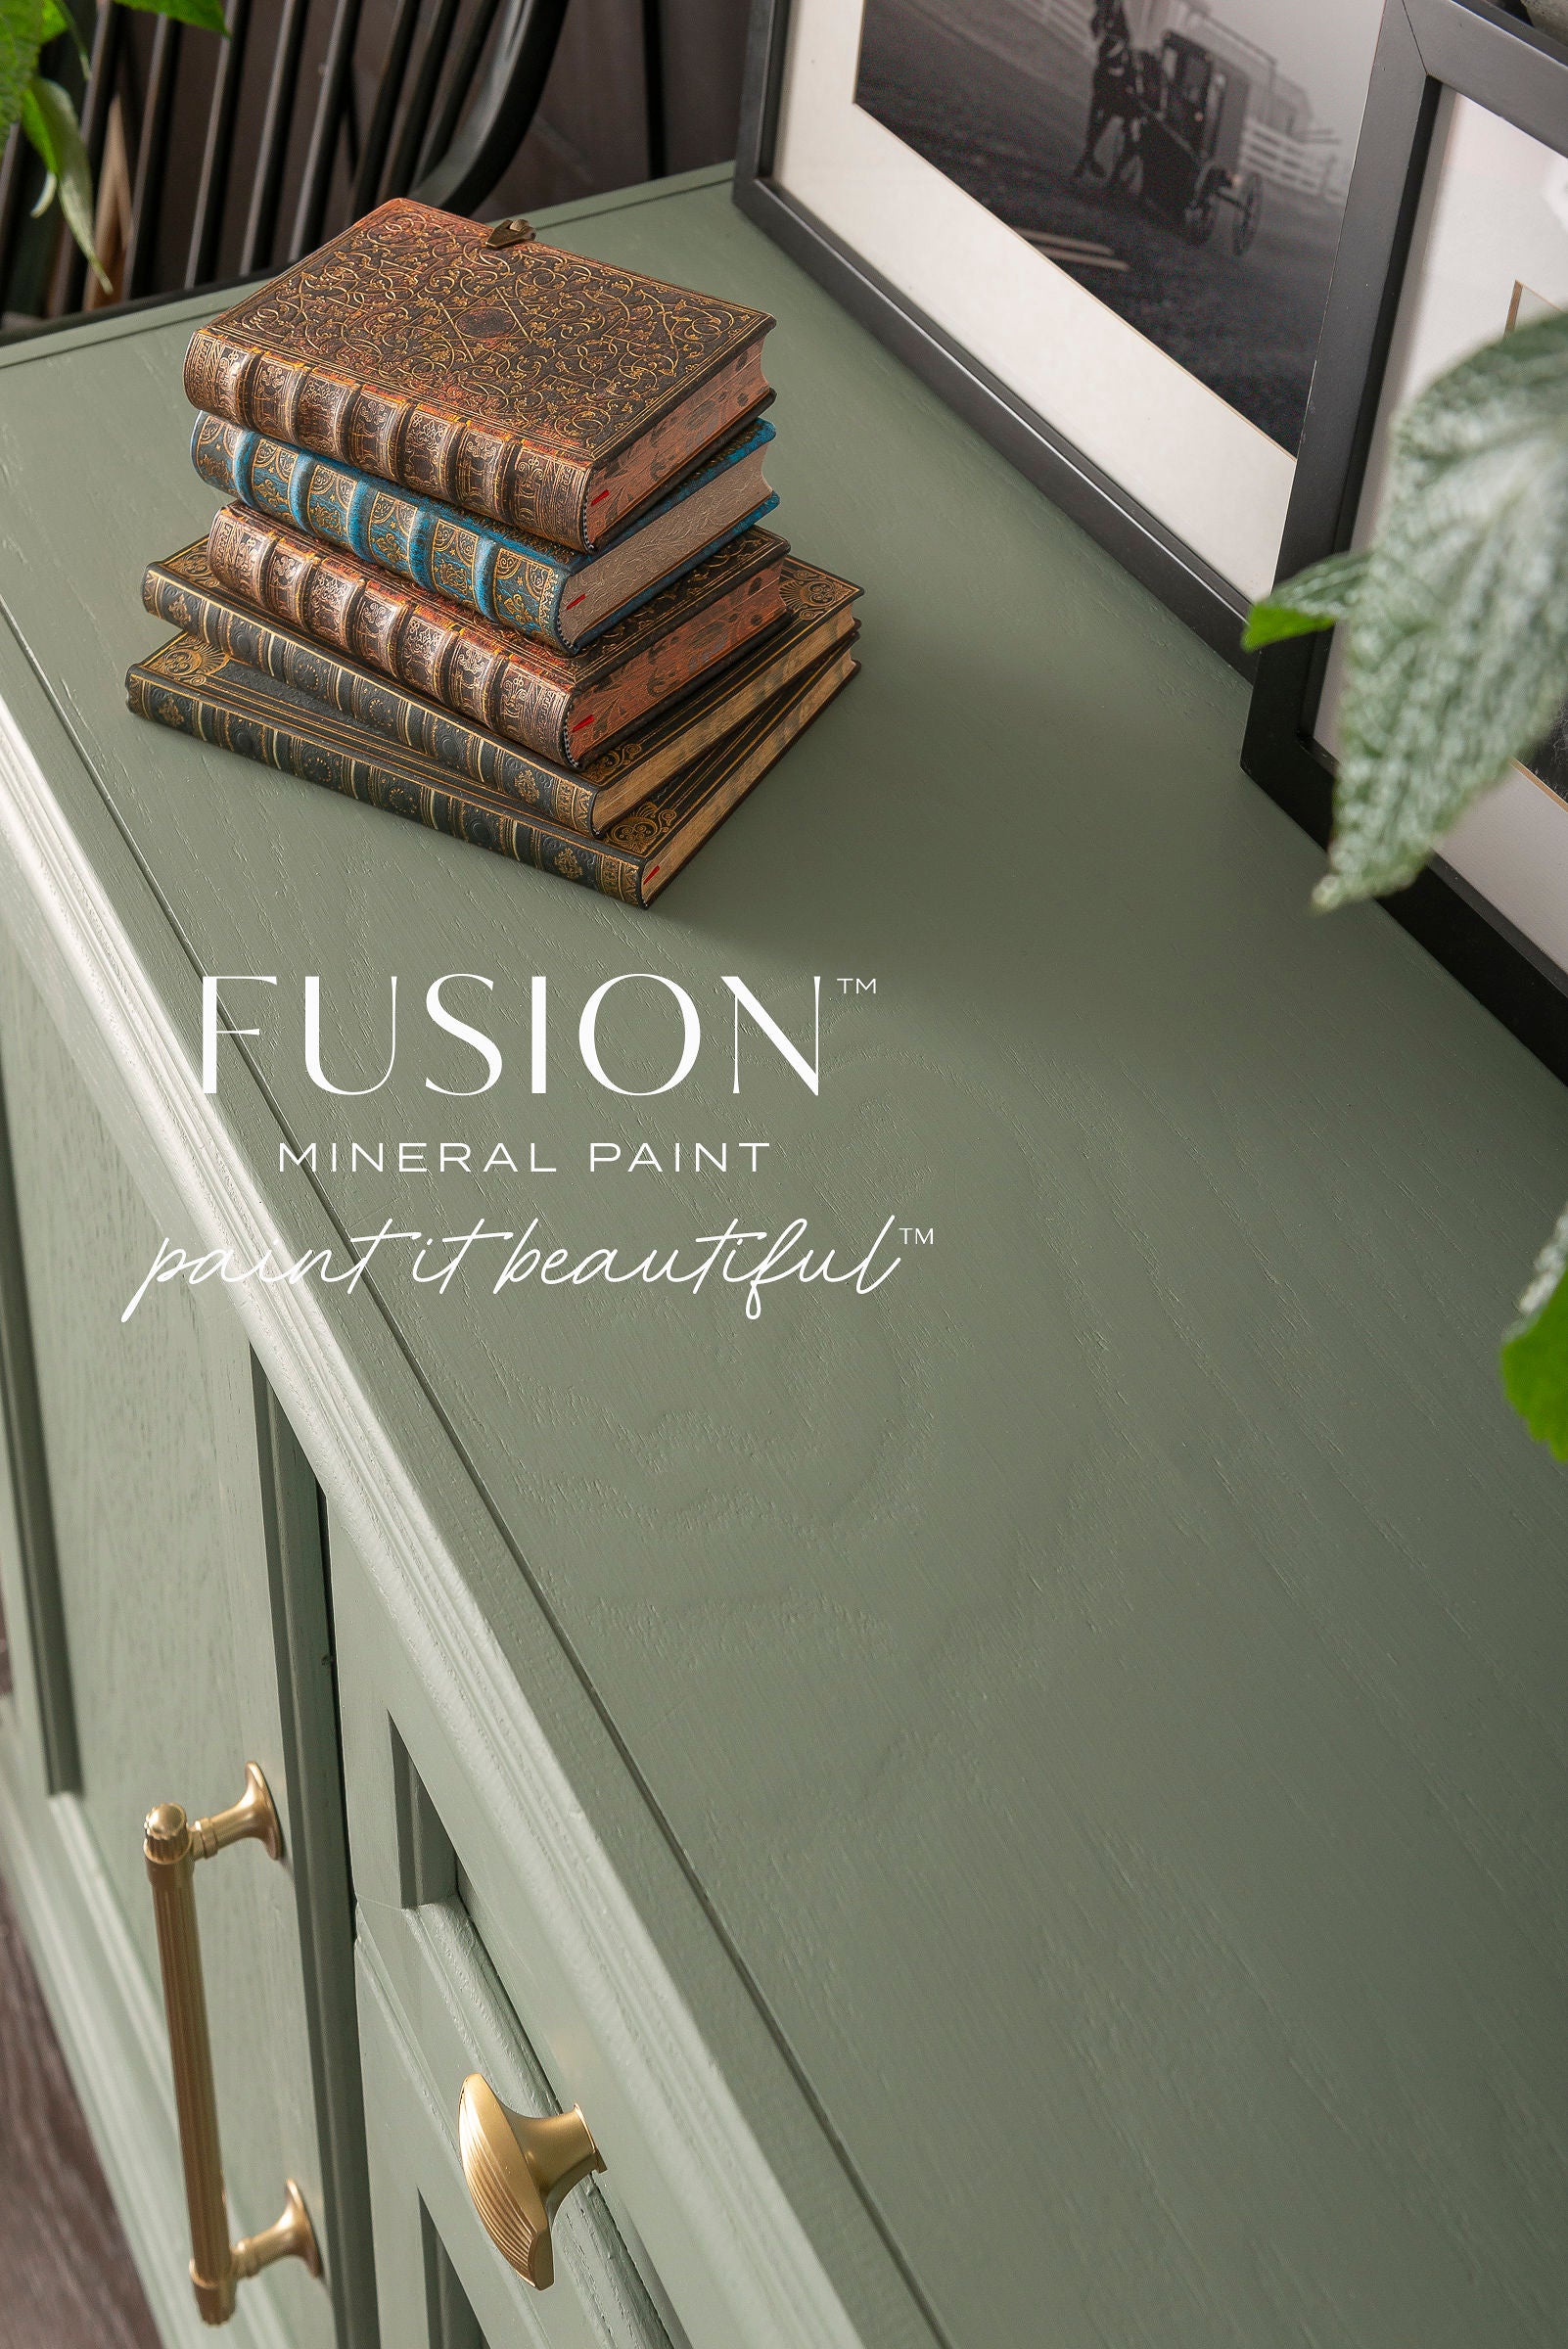 Fusion Mineral Paint Carriage House painted Sideboard